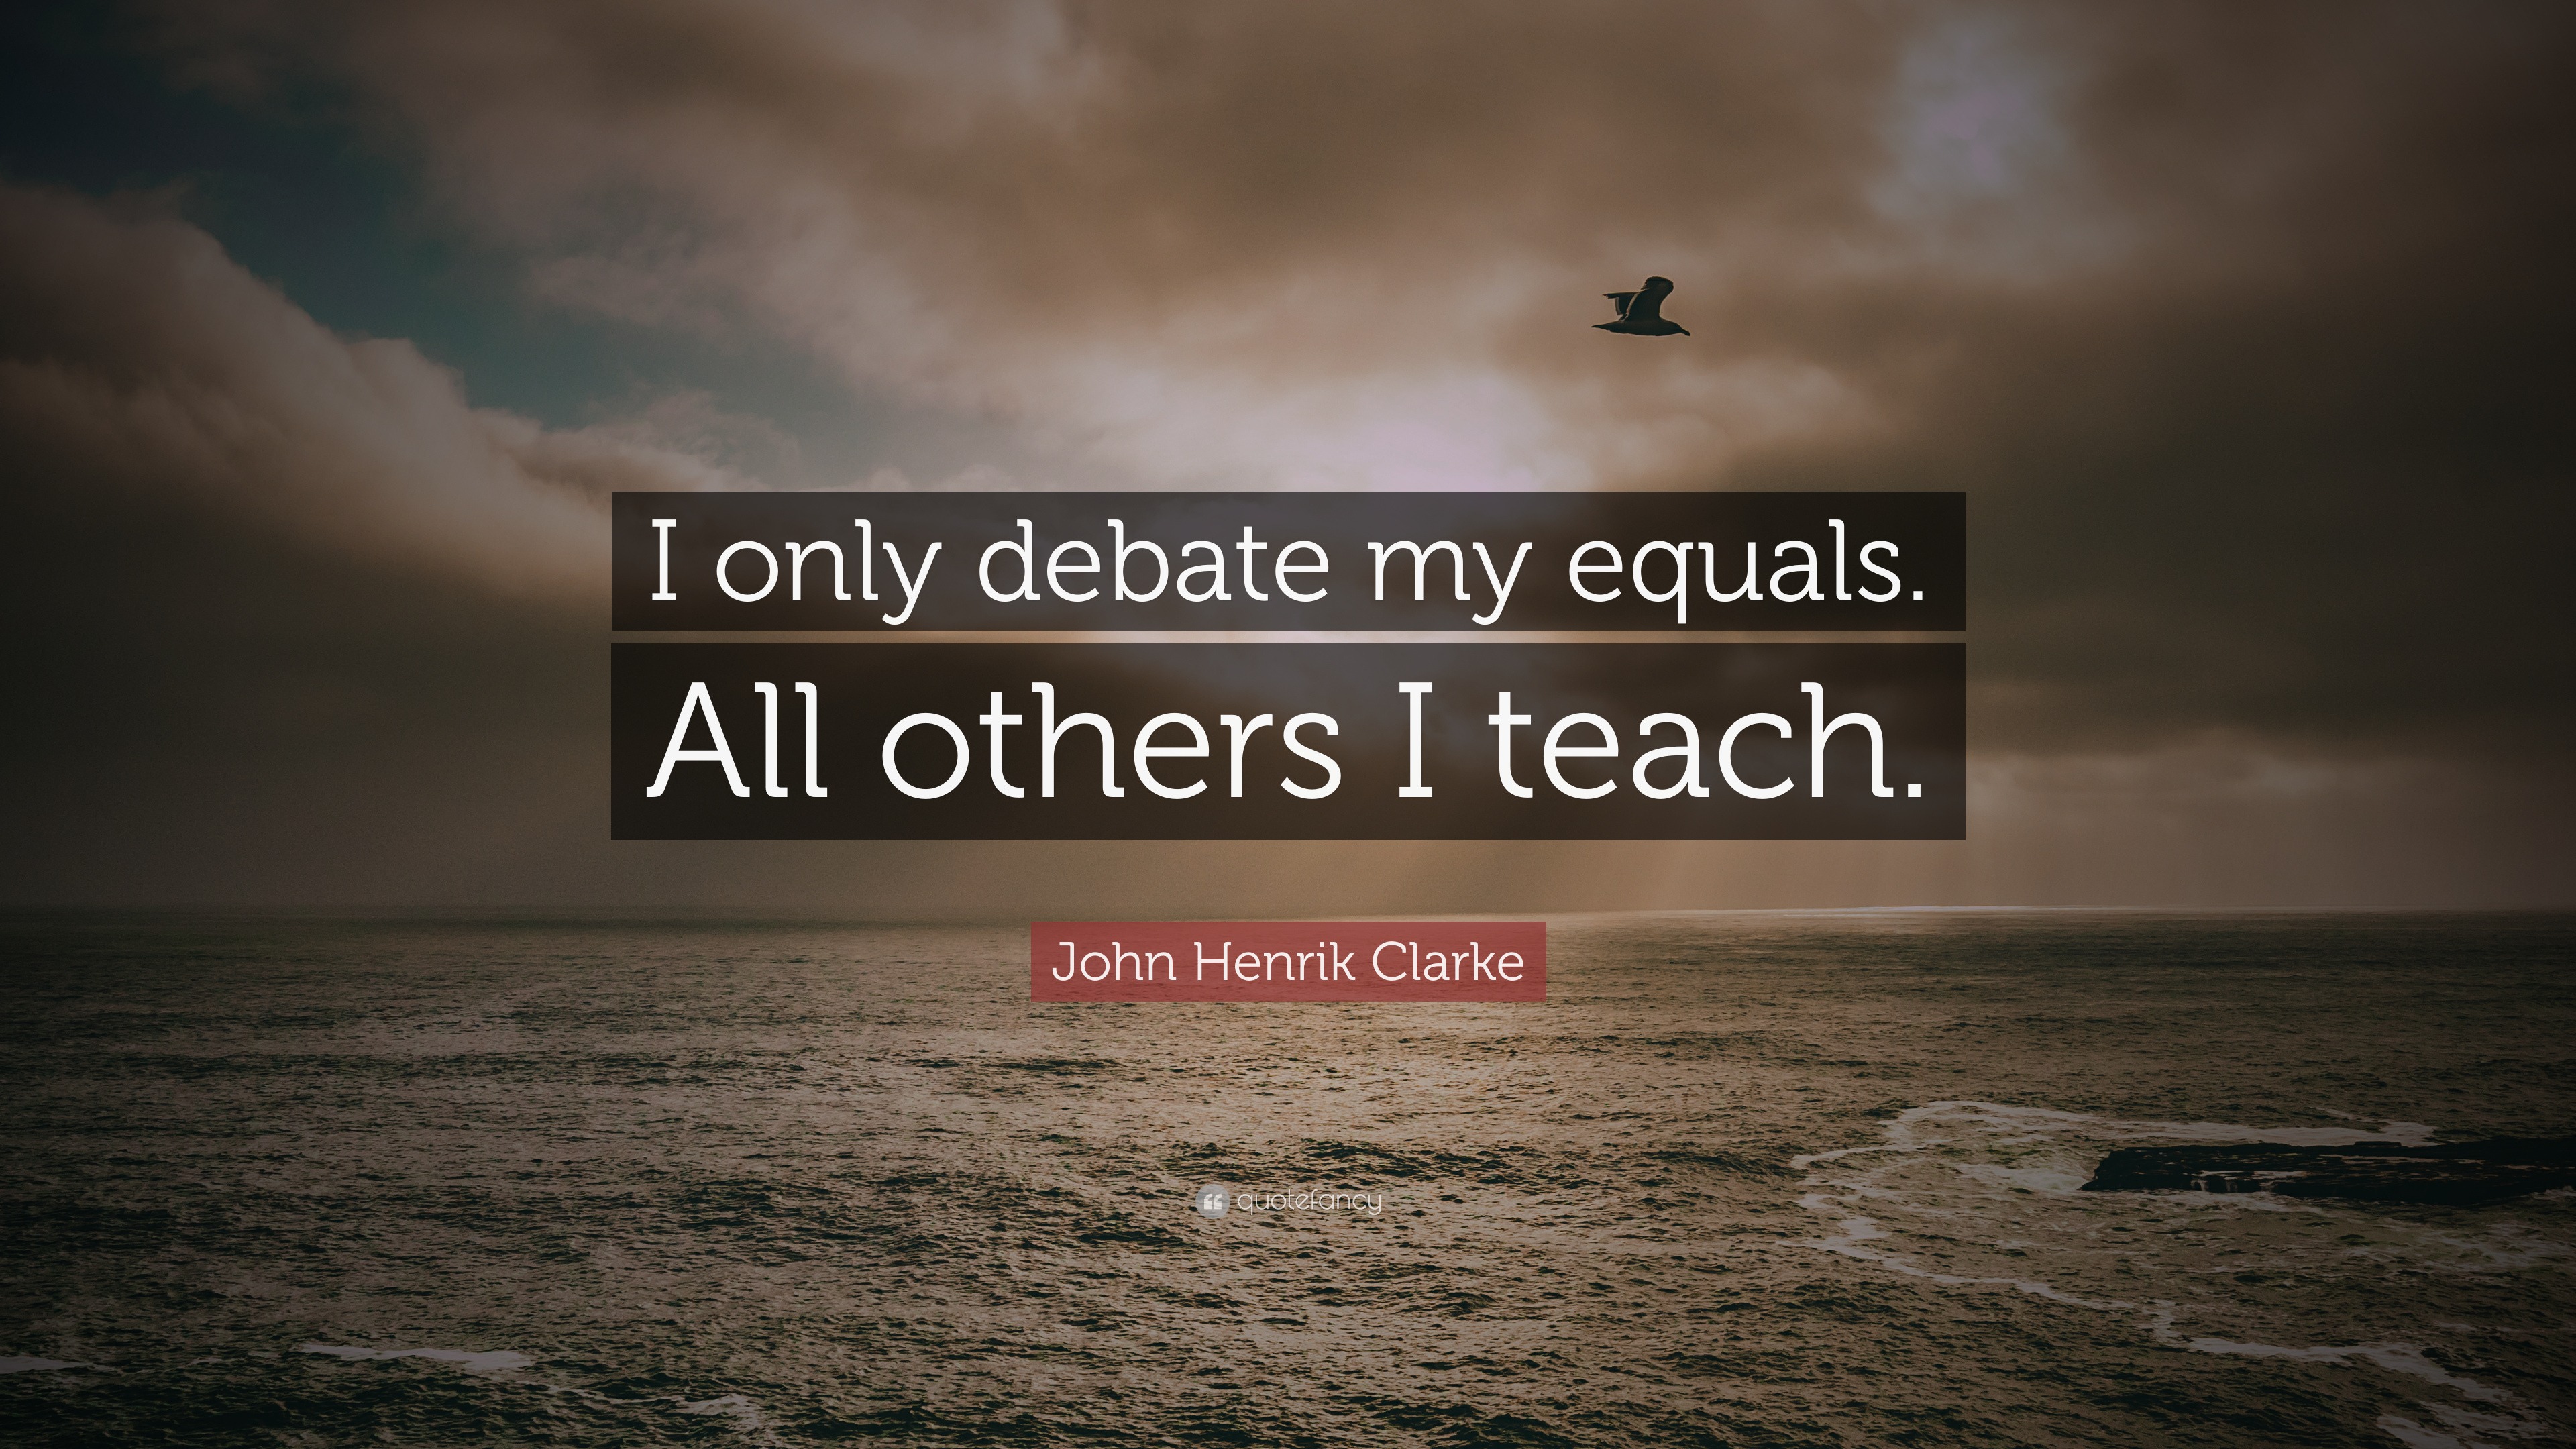 styrte Periodisk George Hanbury John Henrik Clarke Quote: “I only debate my equals. All others I teach.”